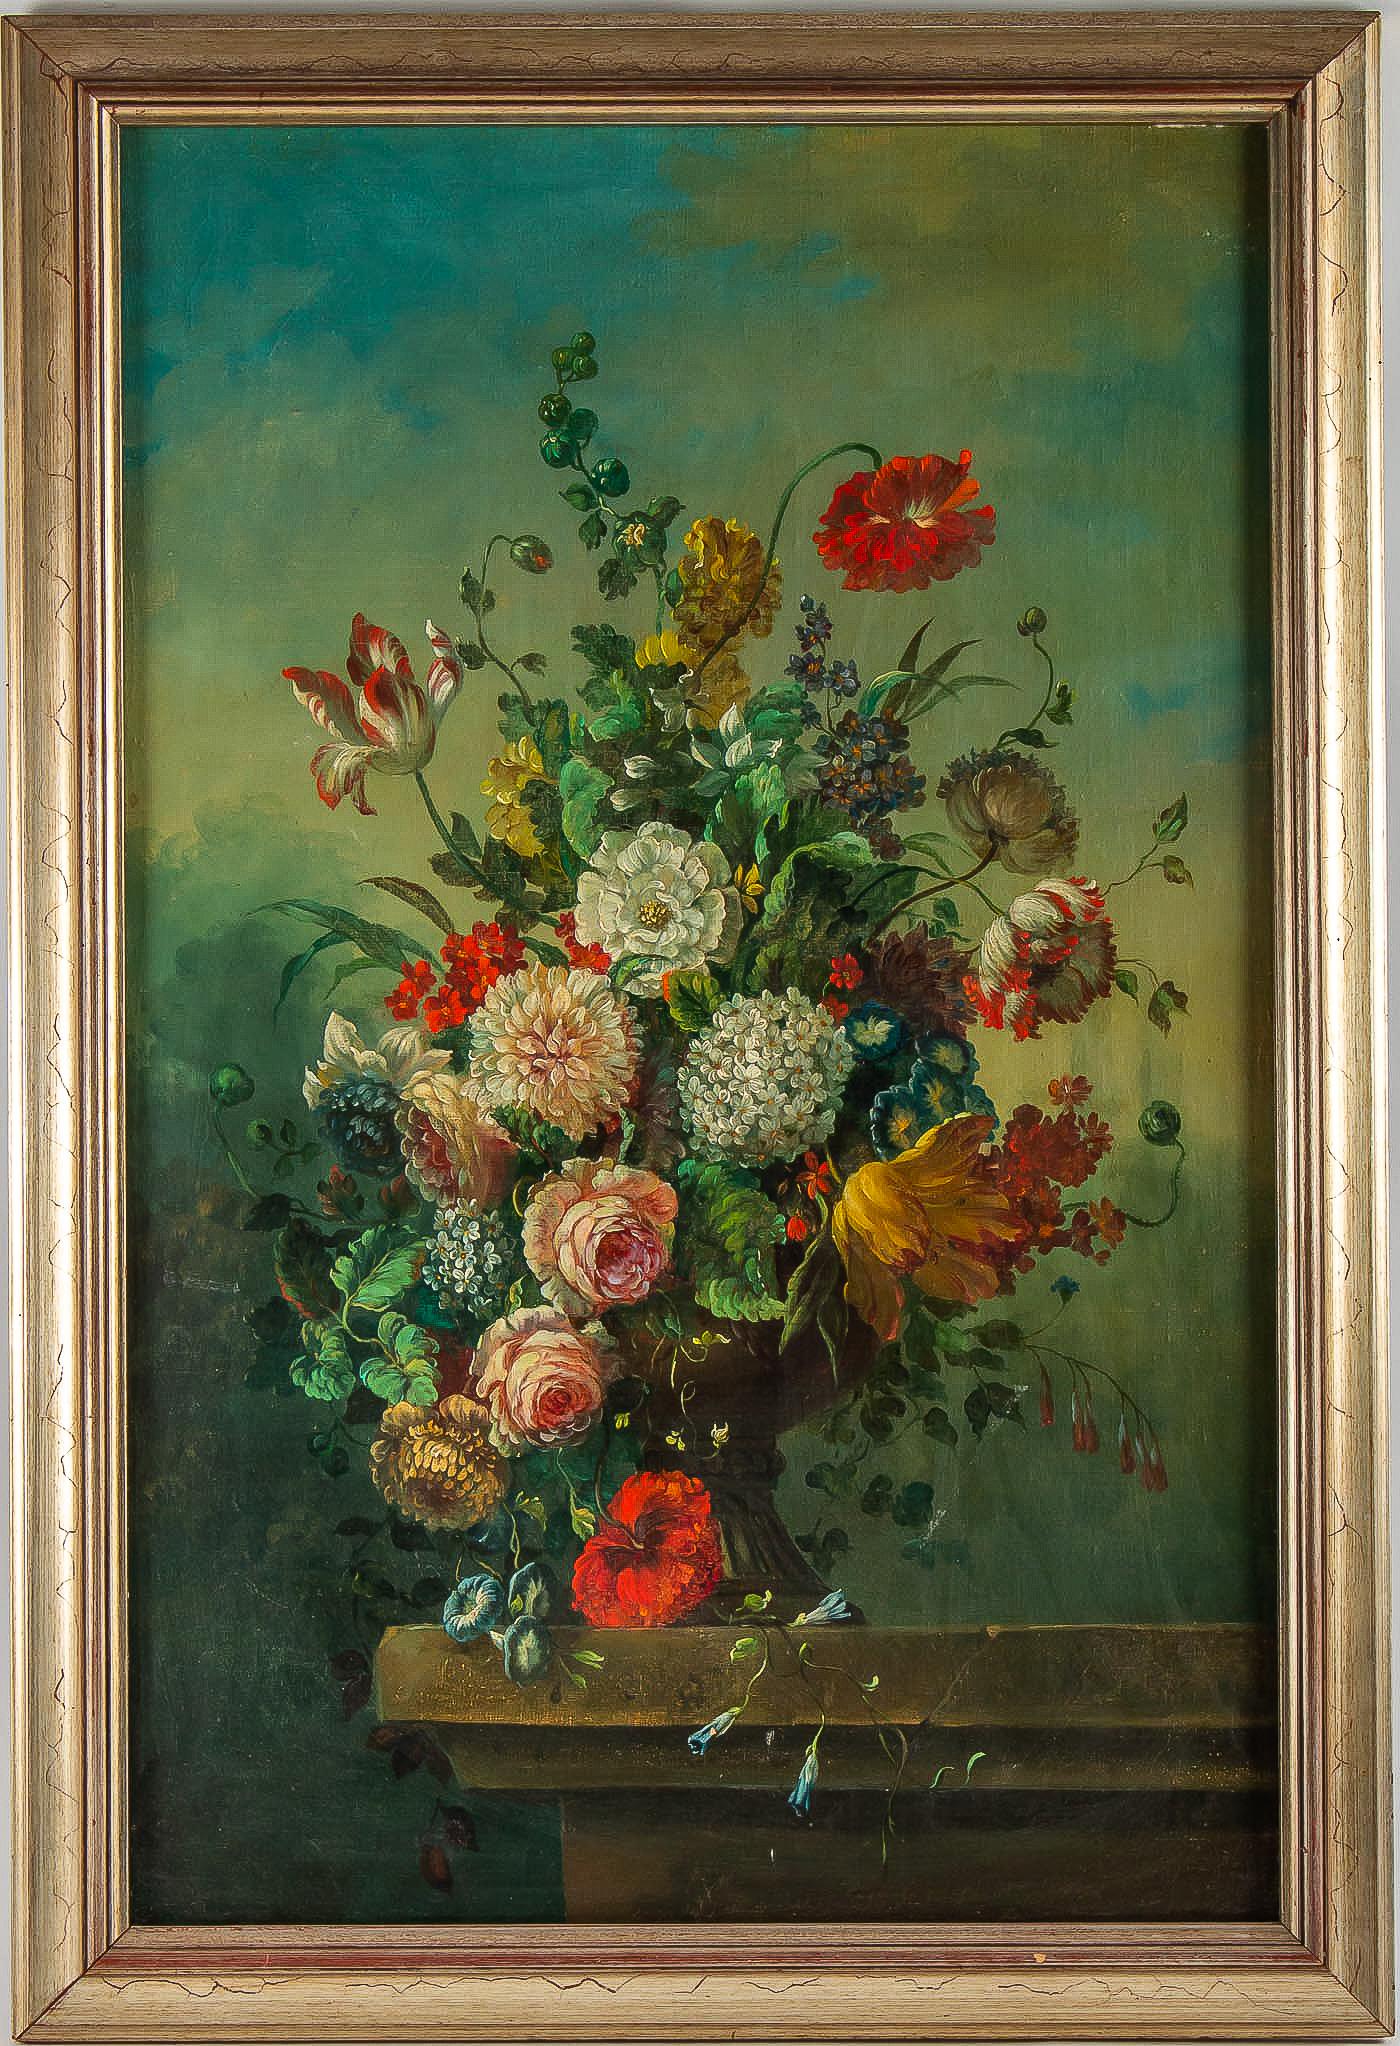 French Romantique school, oil on canvas bouquets of flowers on stone-ledge, circa 1830

An elegant and decorative oil on canvas mounted on wood, depicting a flower bouquets with tulips, roses and blue lilies resting on stone-ledge.

Early 19h